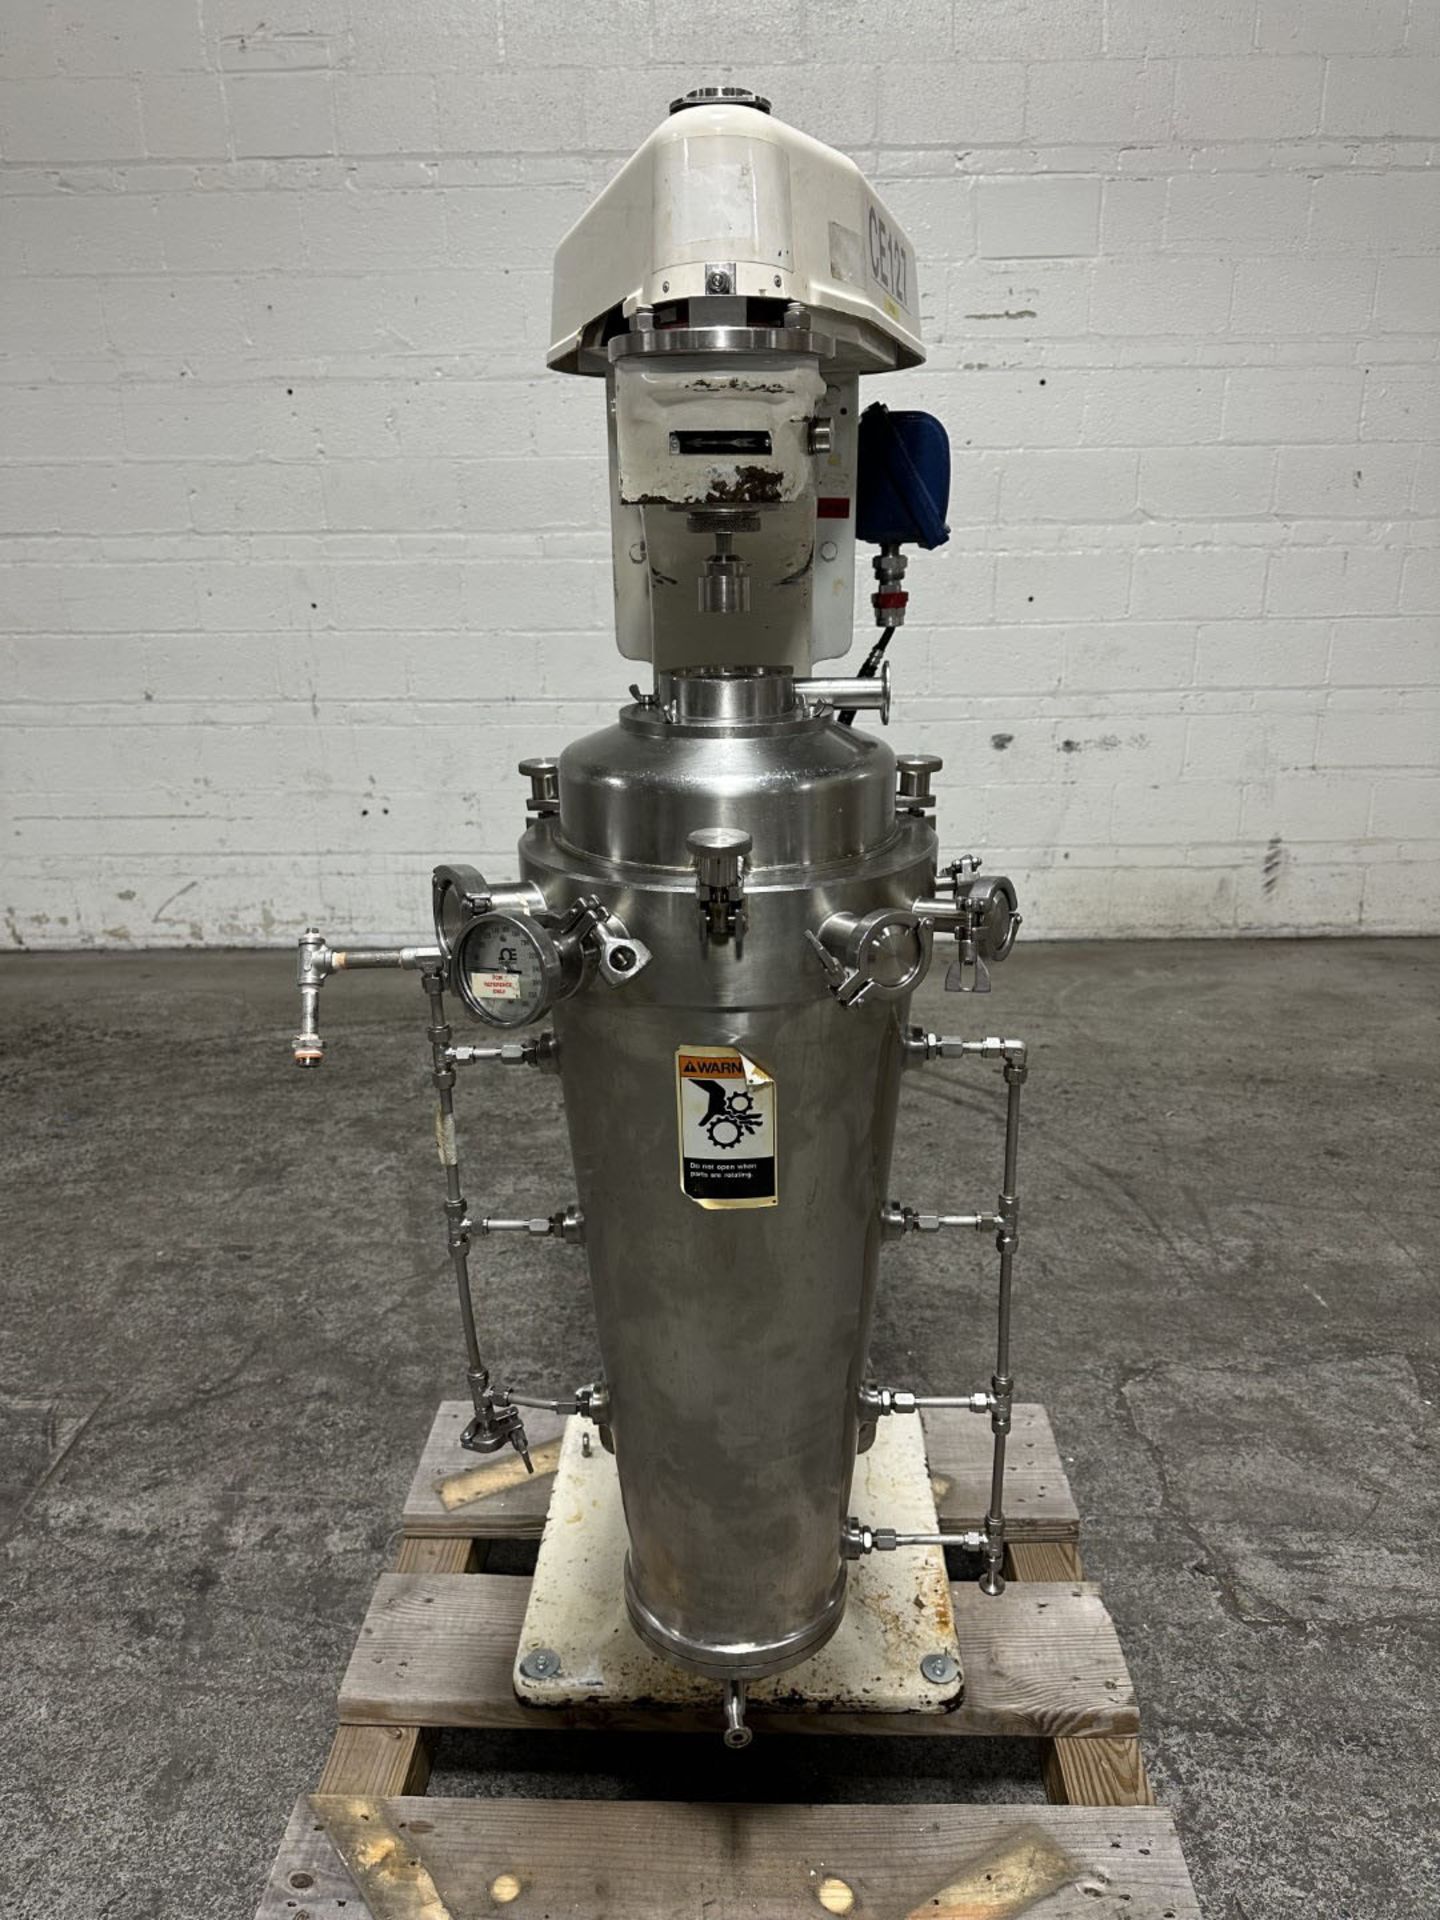 Sharples vaporite super centrifuge, model AS16VB, stainless steel construction, 17000 RPM max speed, - Image 18 of 20